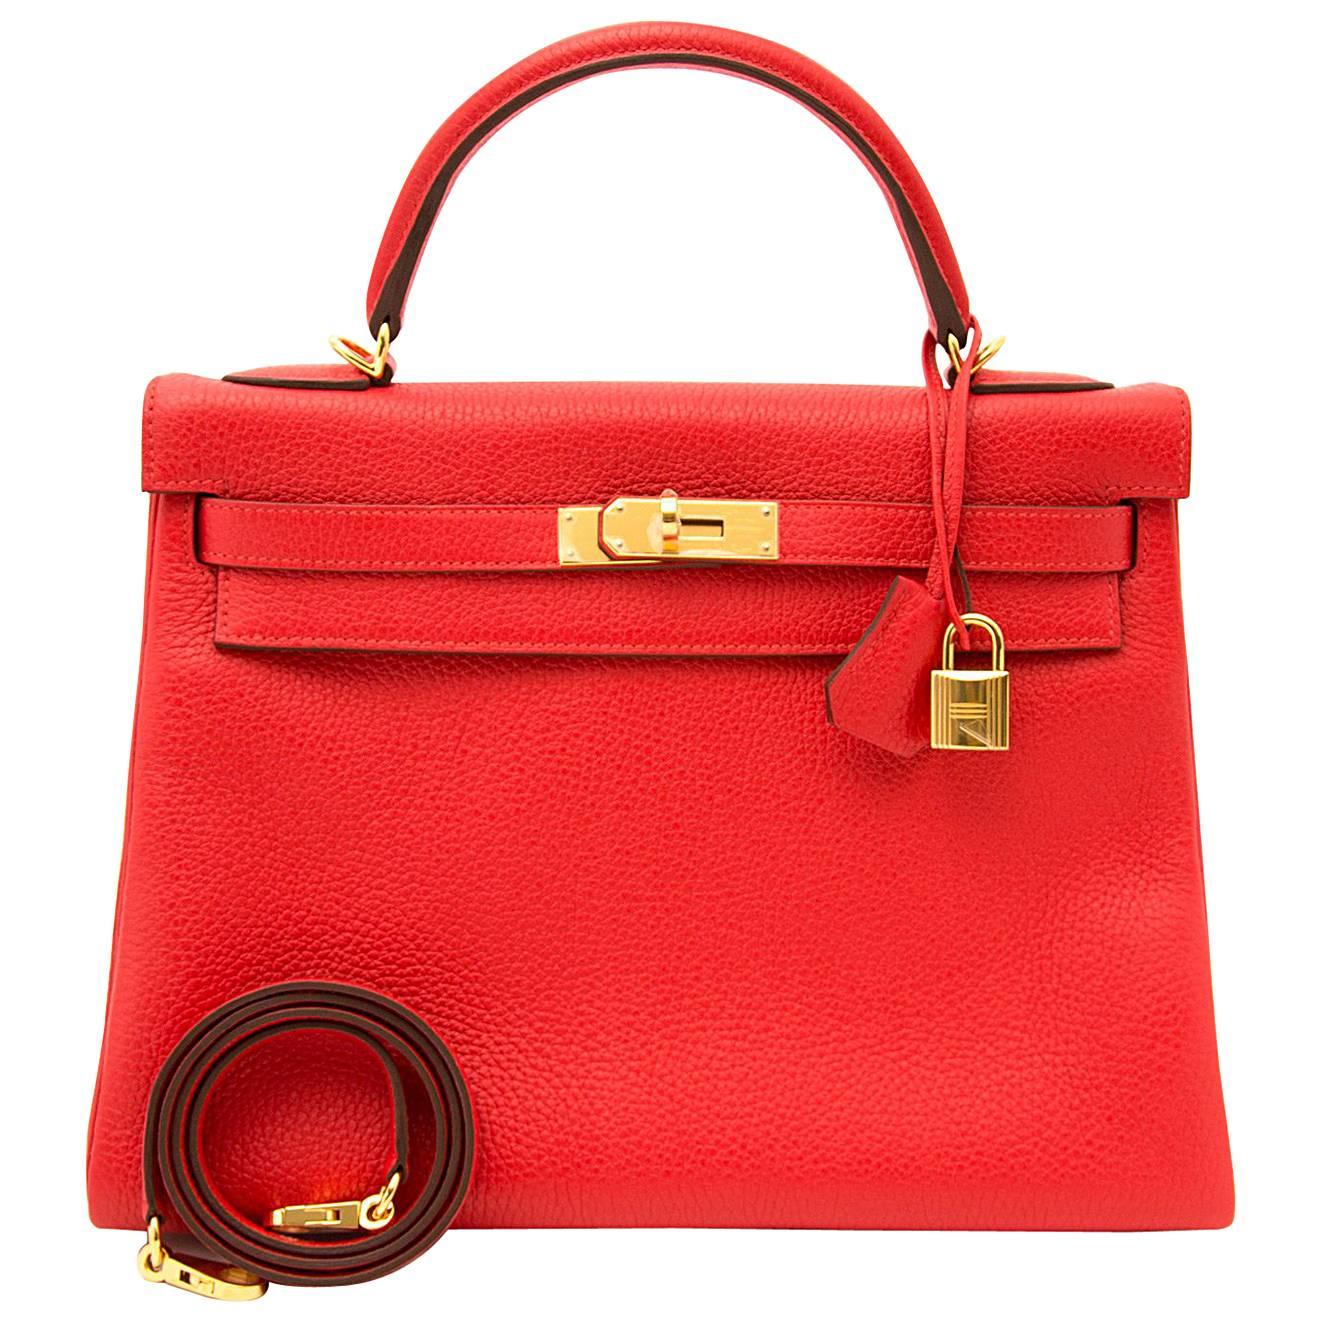 BRAND NEW Hermes Kelly Clemence Taurillon Rouge Tomate 32 